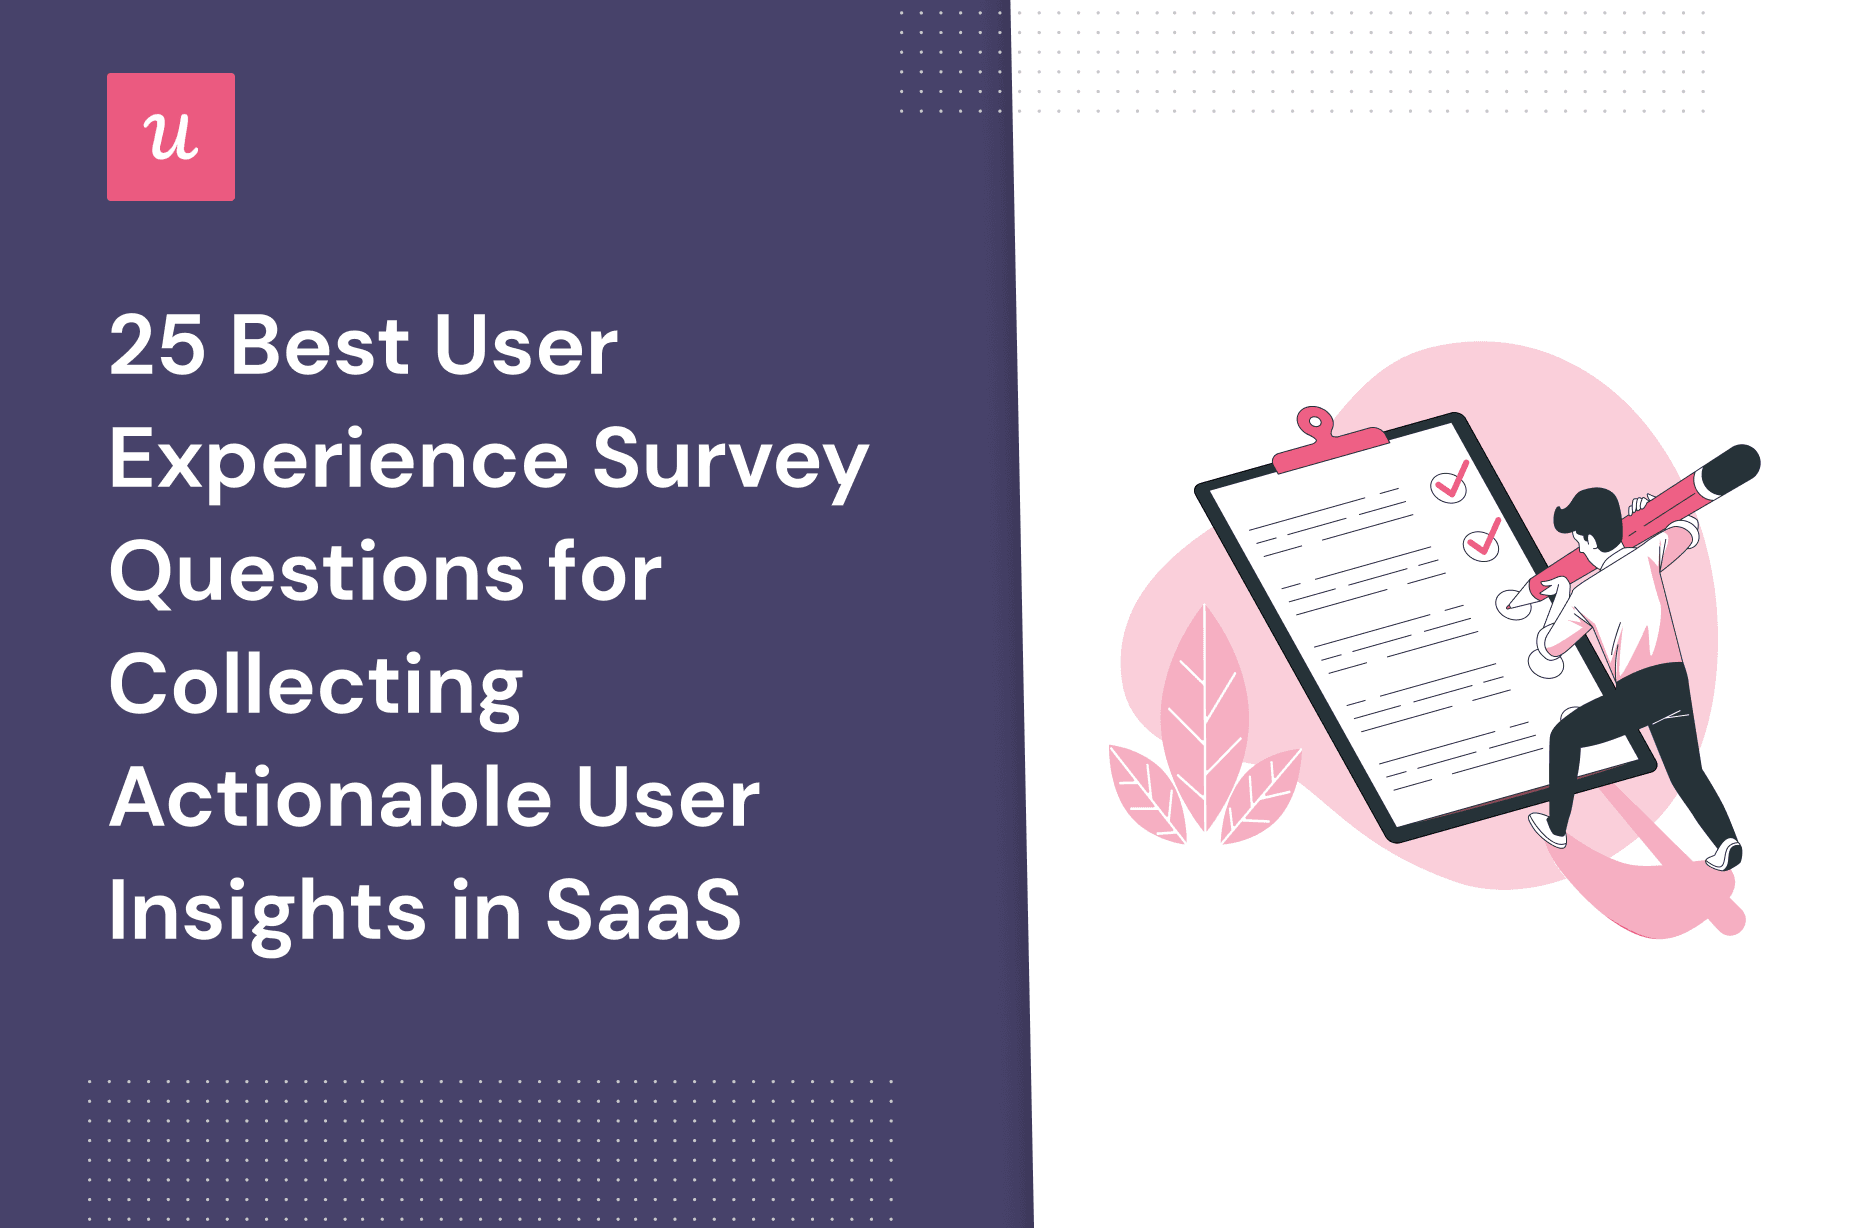 25 Best User Experience Survey Questions For Collecting Actionable User Insights in SaaS cover